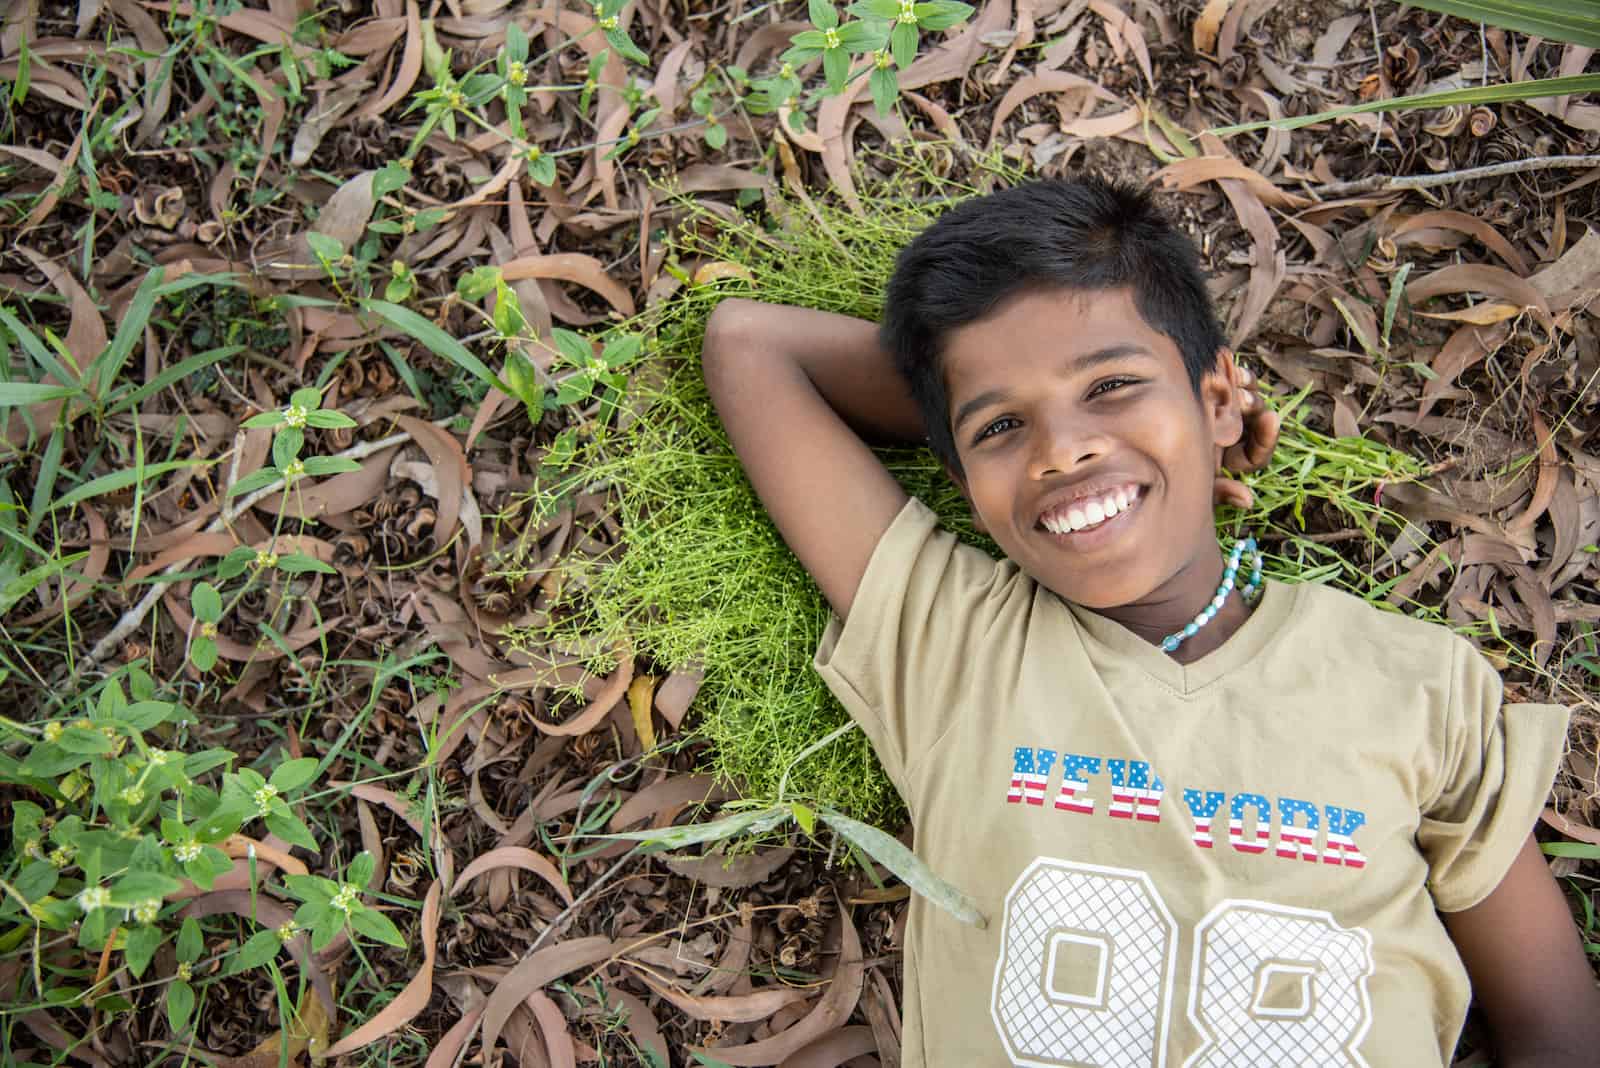 A boy in a tan shirt lays in the grass on the ground, smiling.